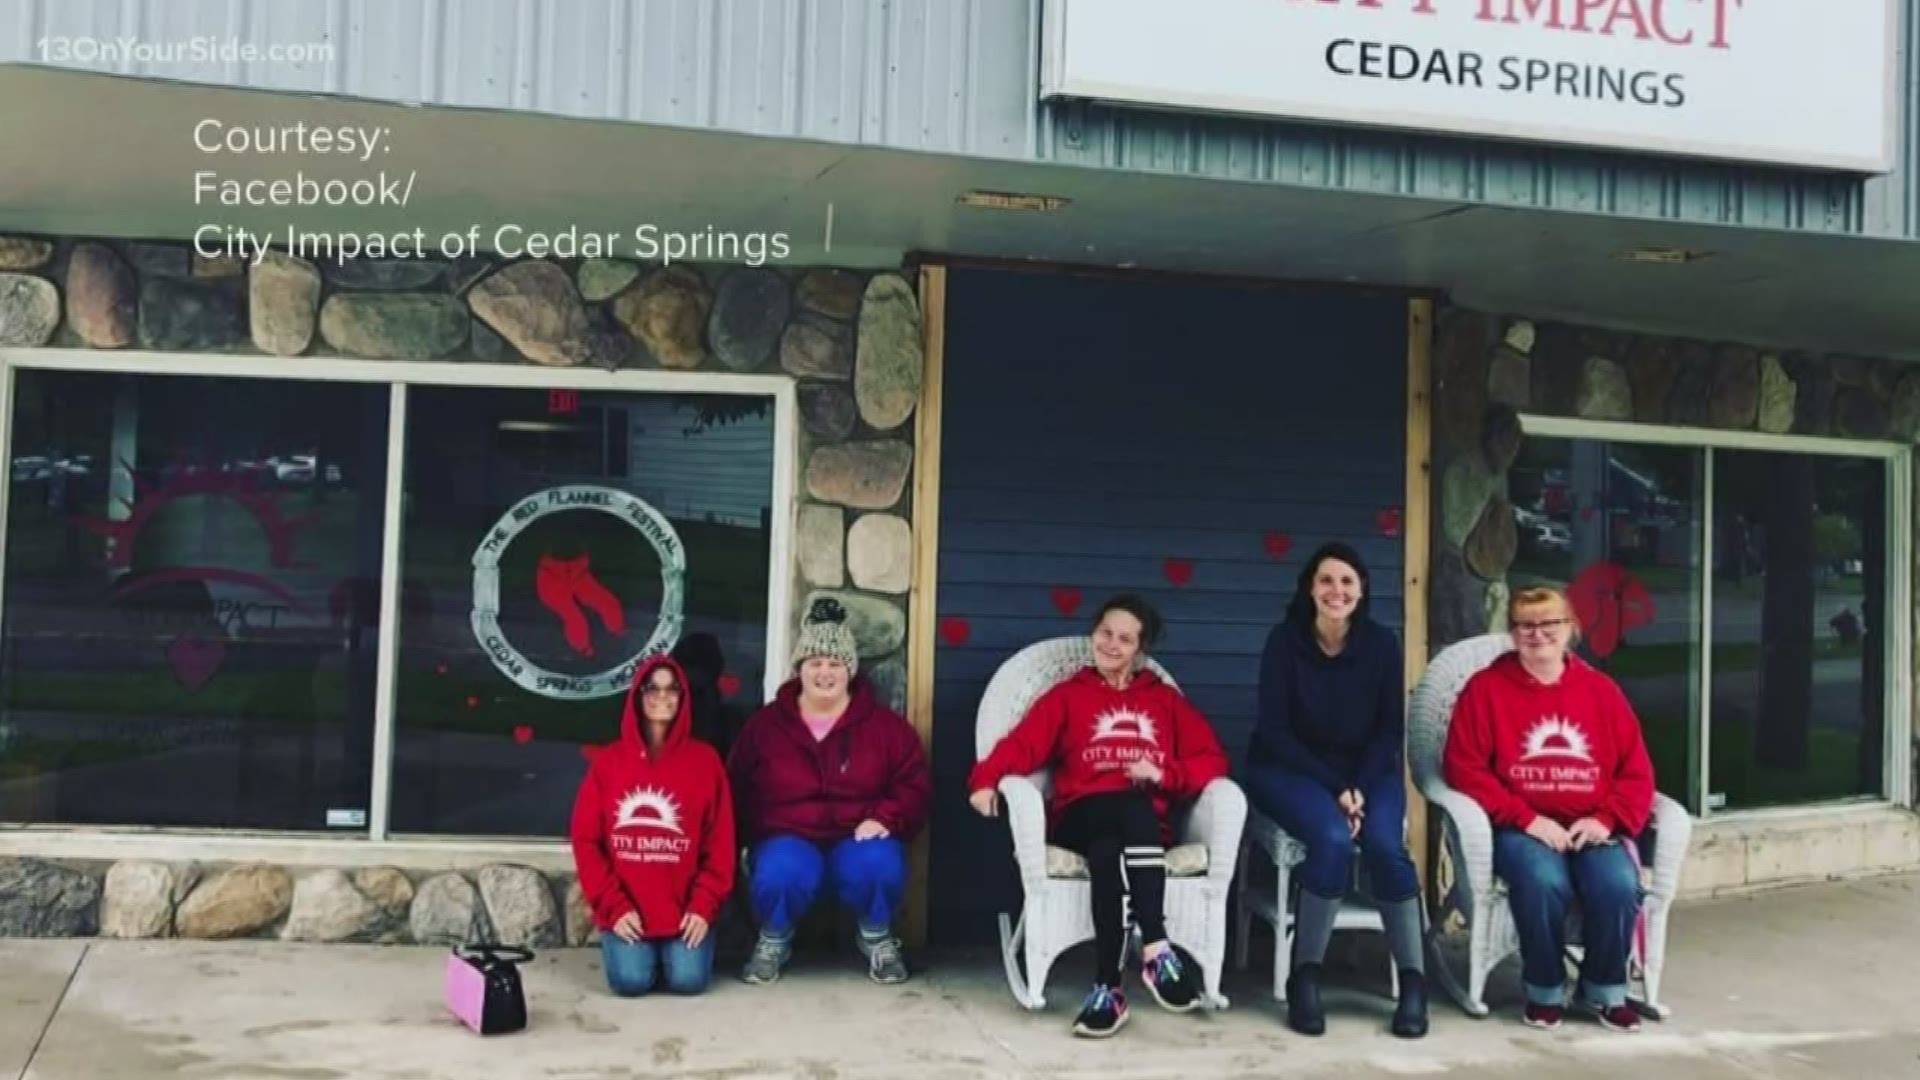 "They do so much good for our small community of Cedar Springs."